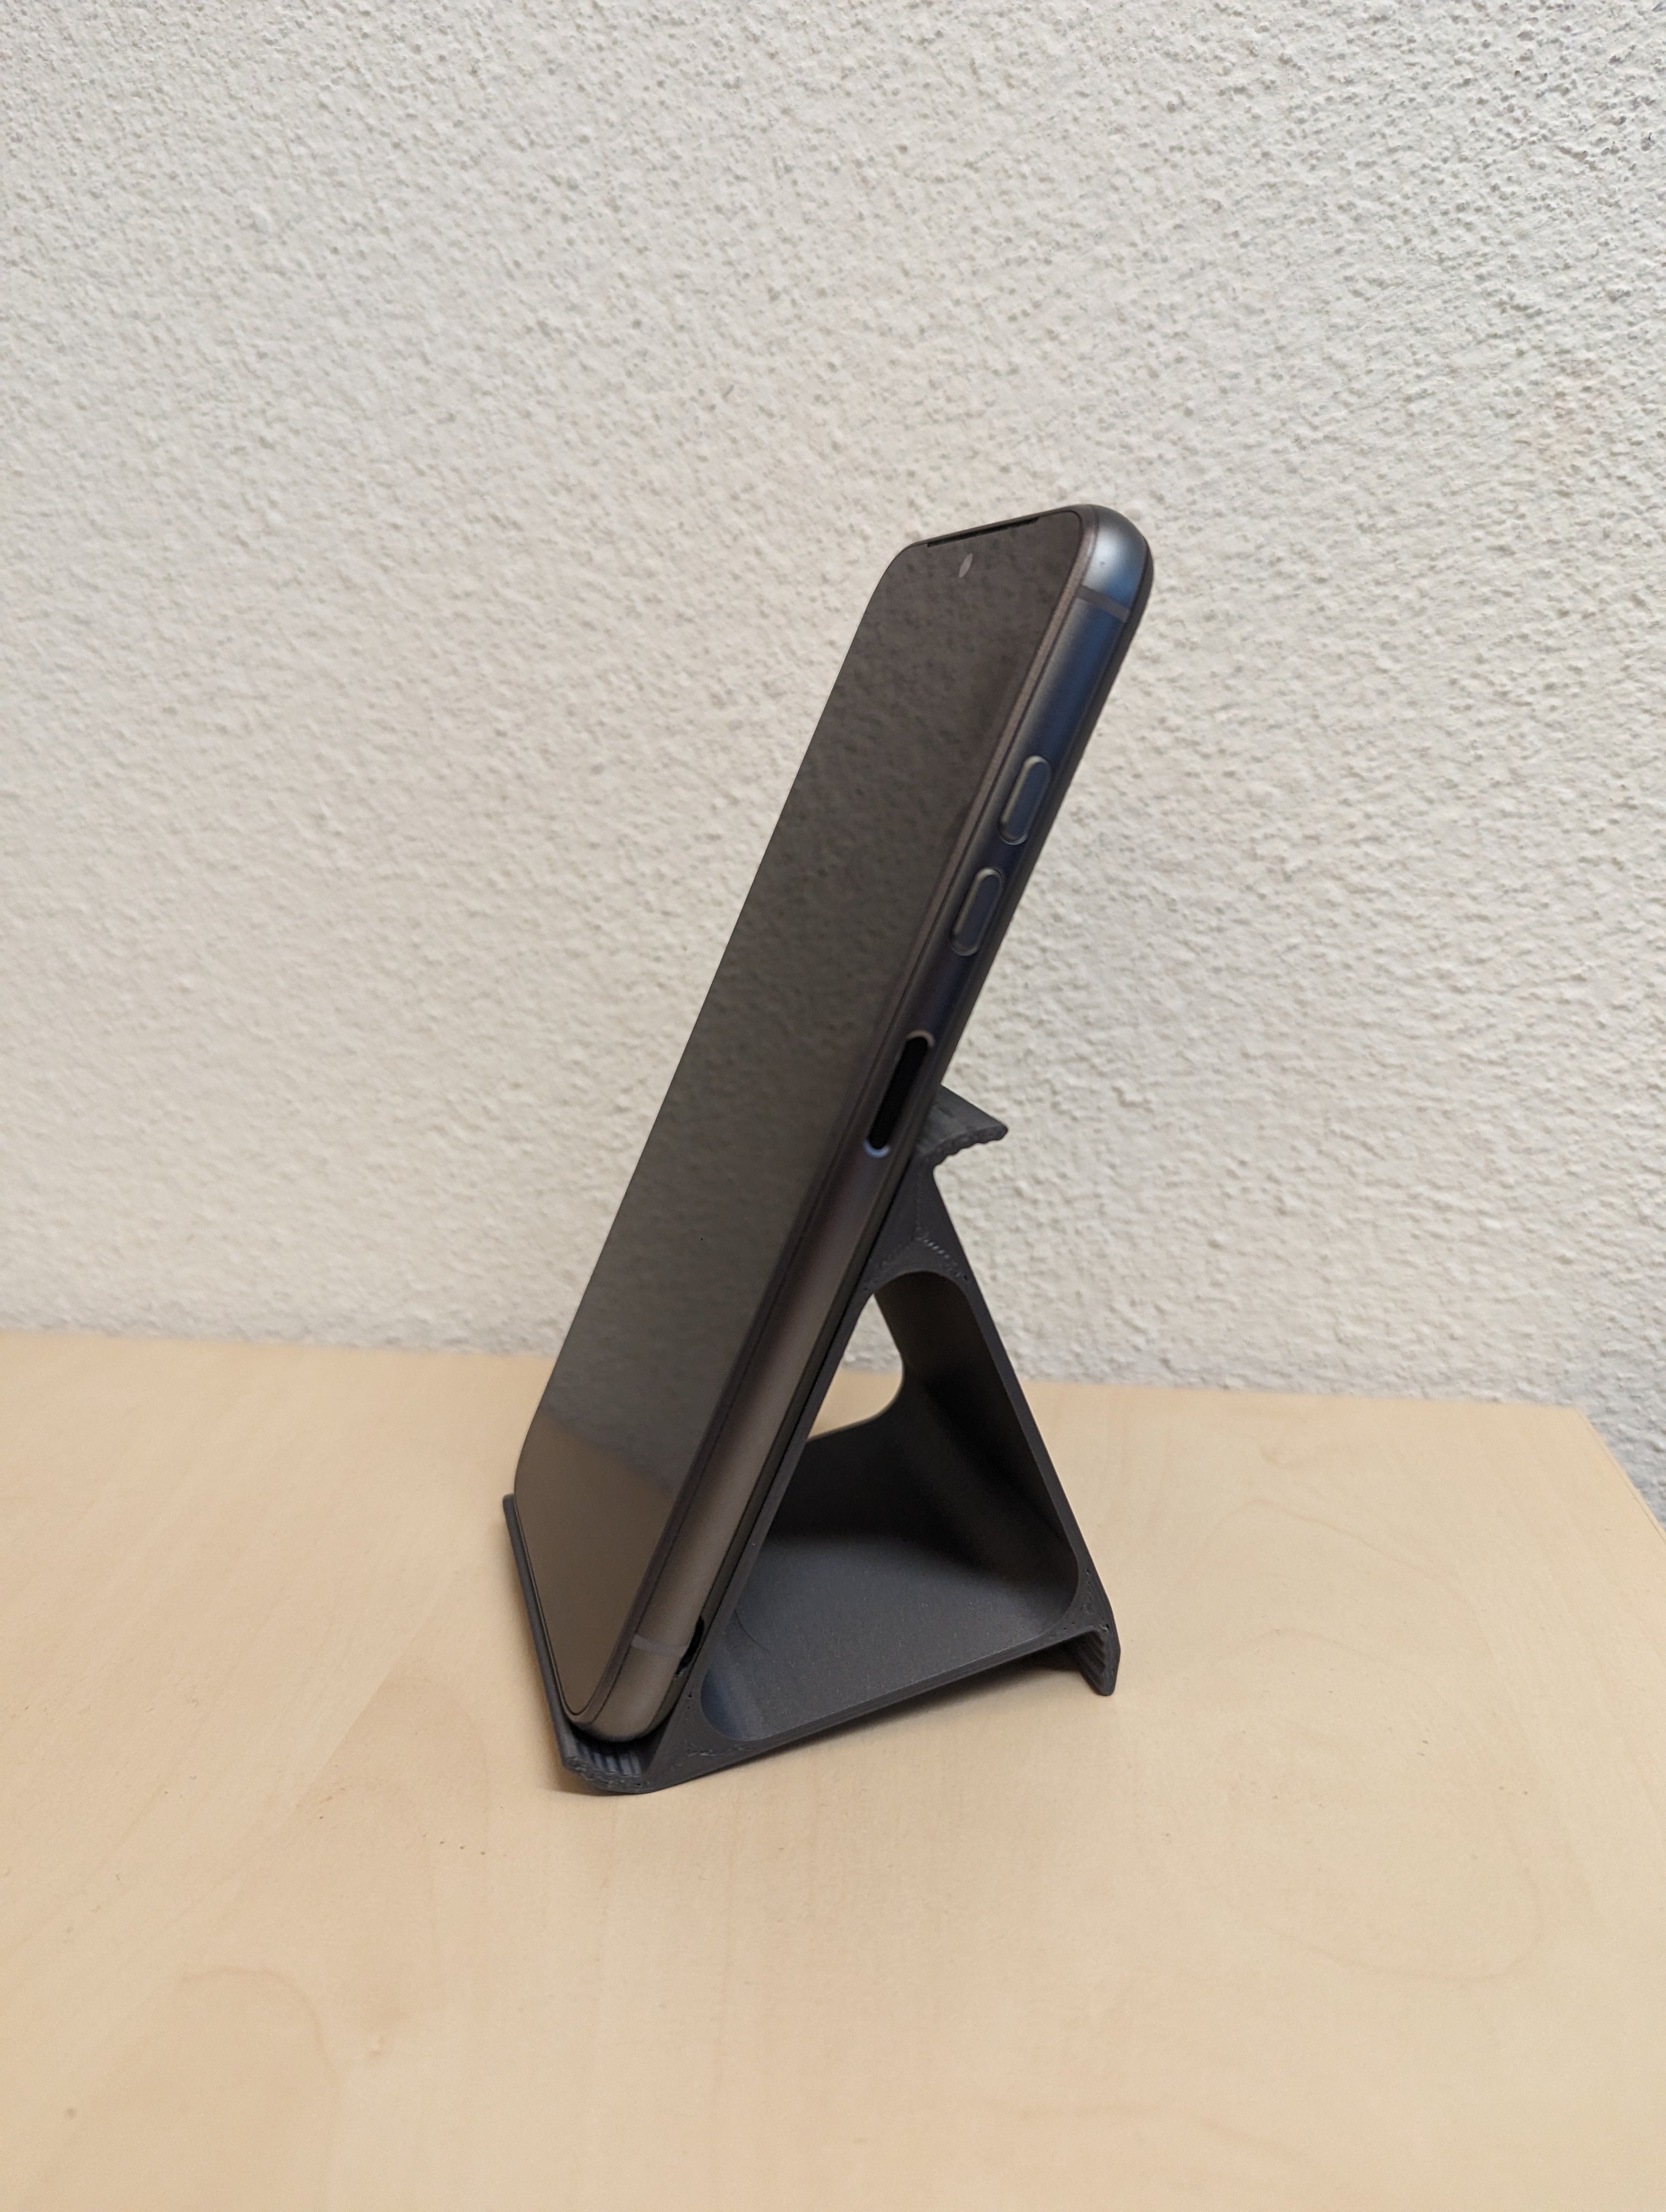 Support à 3 angles pour smartphone